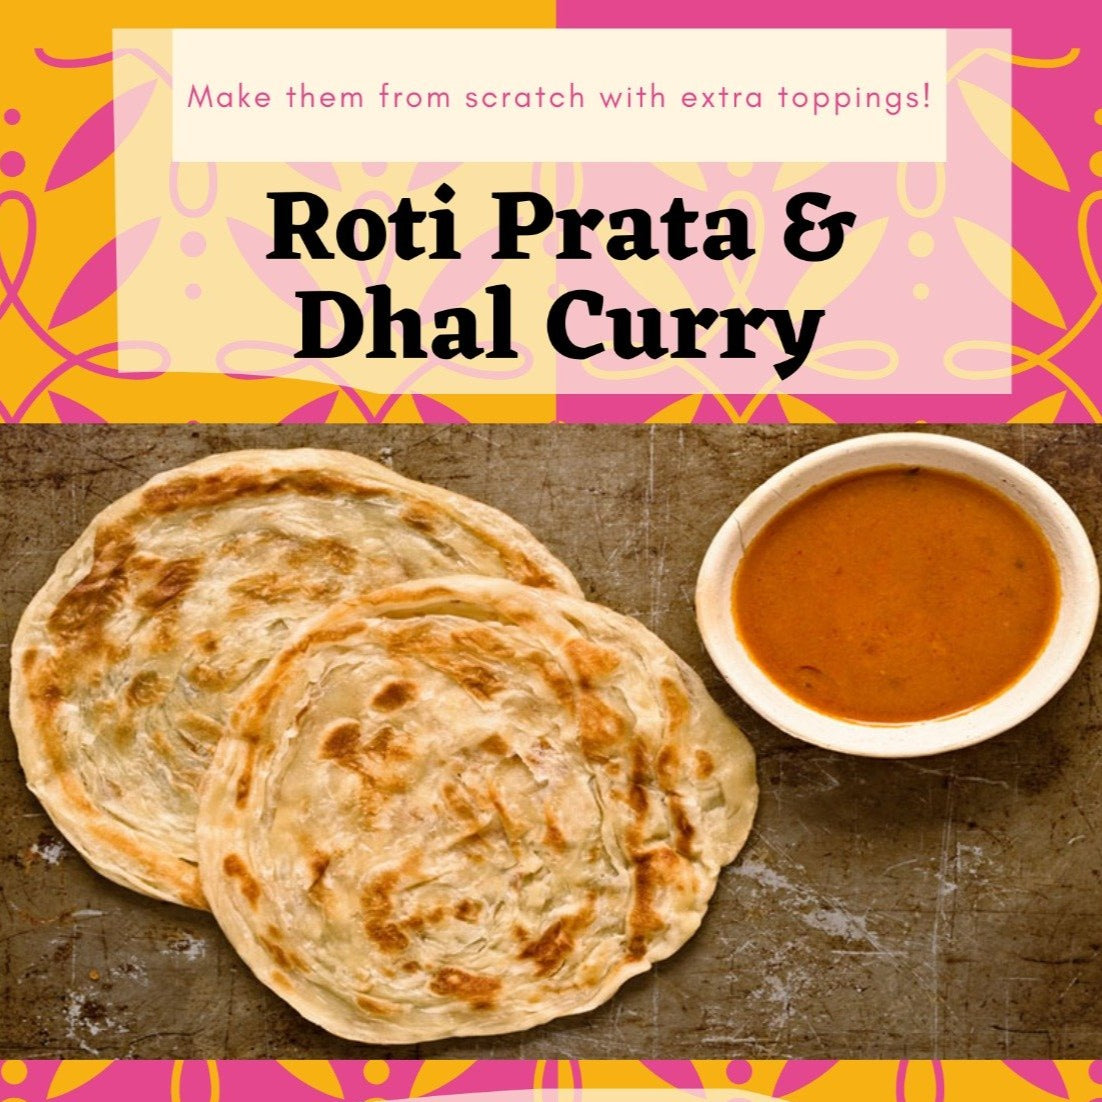 Learn To Make Roti Prata & Dhal Curry - Parent & Child Holiday Workshop